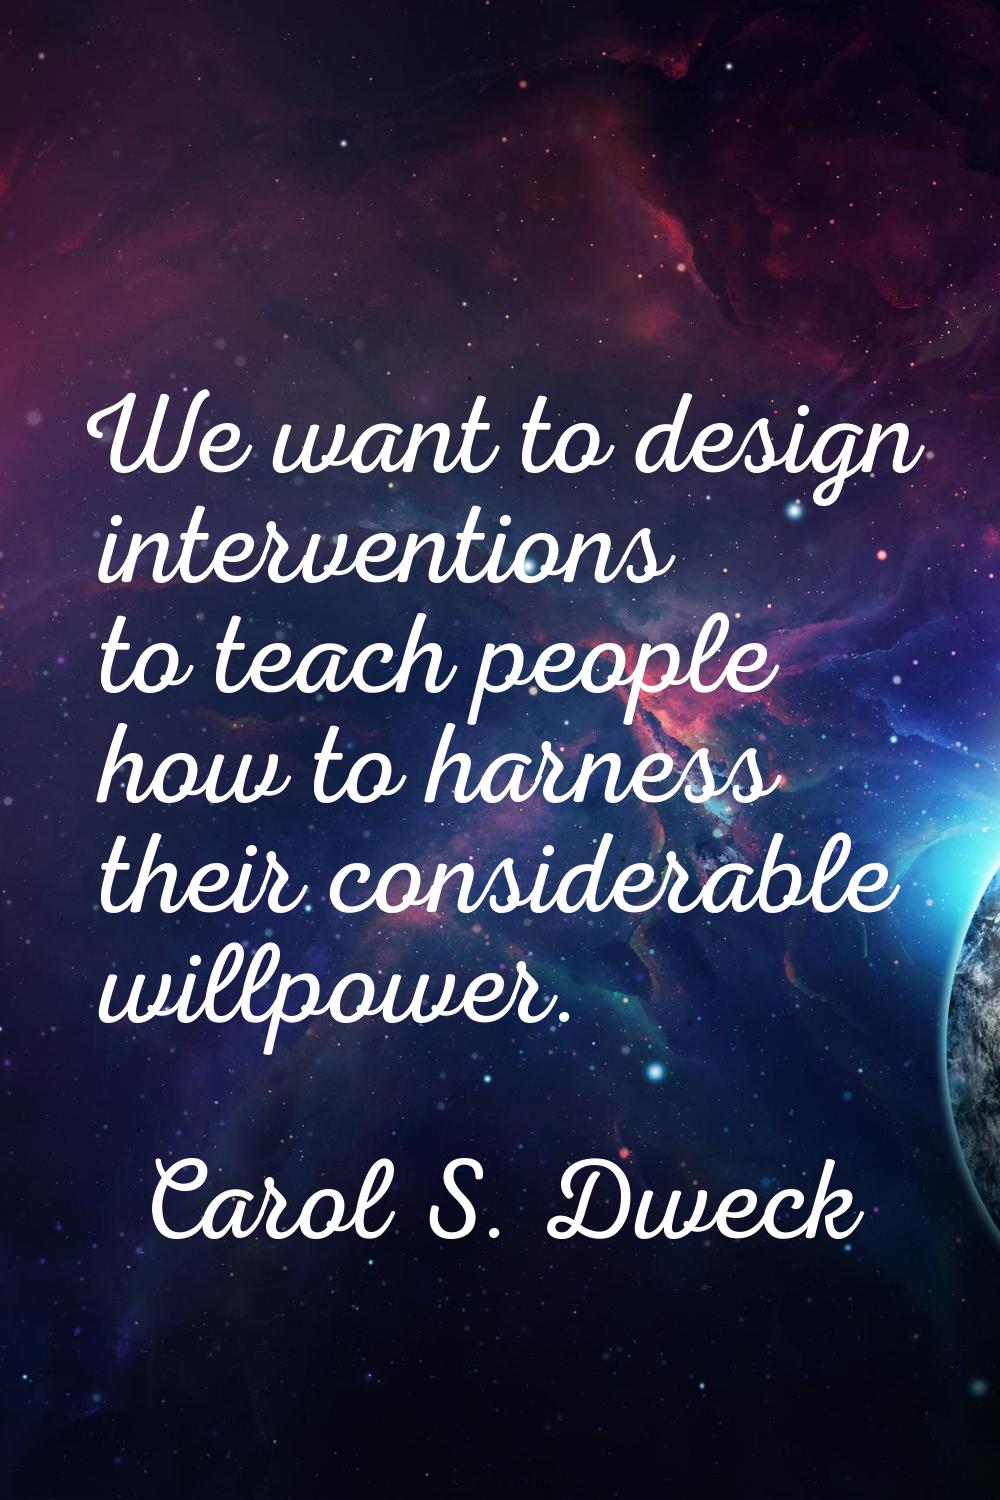 We want to design interventions to teach people how to harness their considerable willpower.